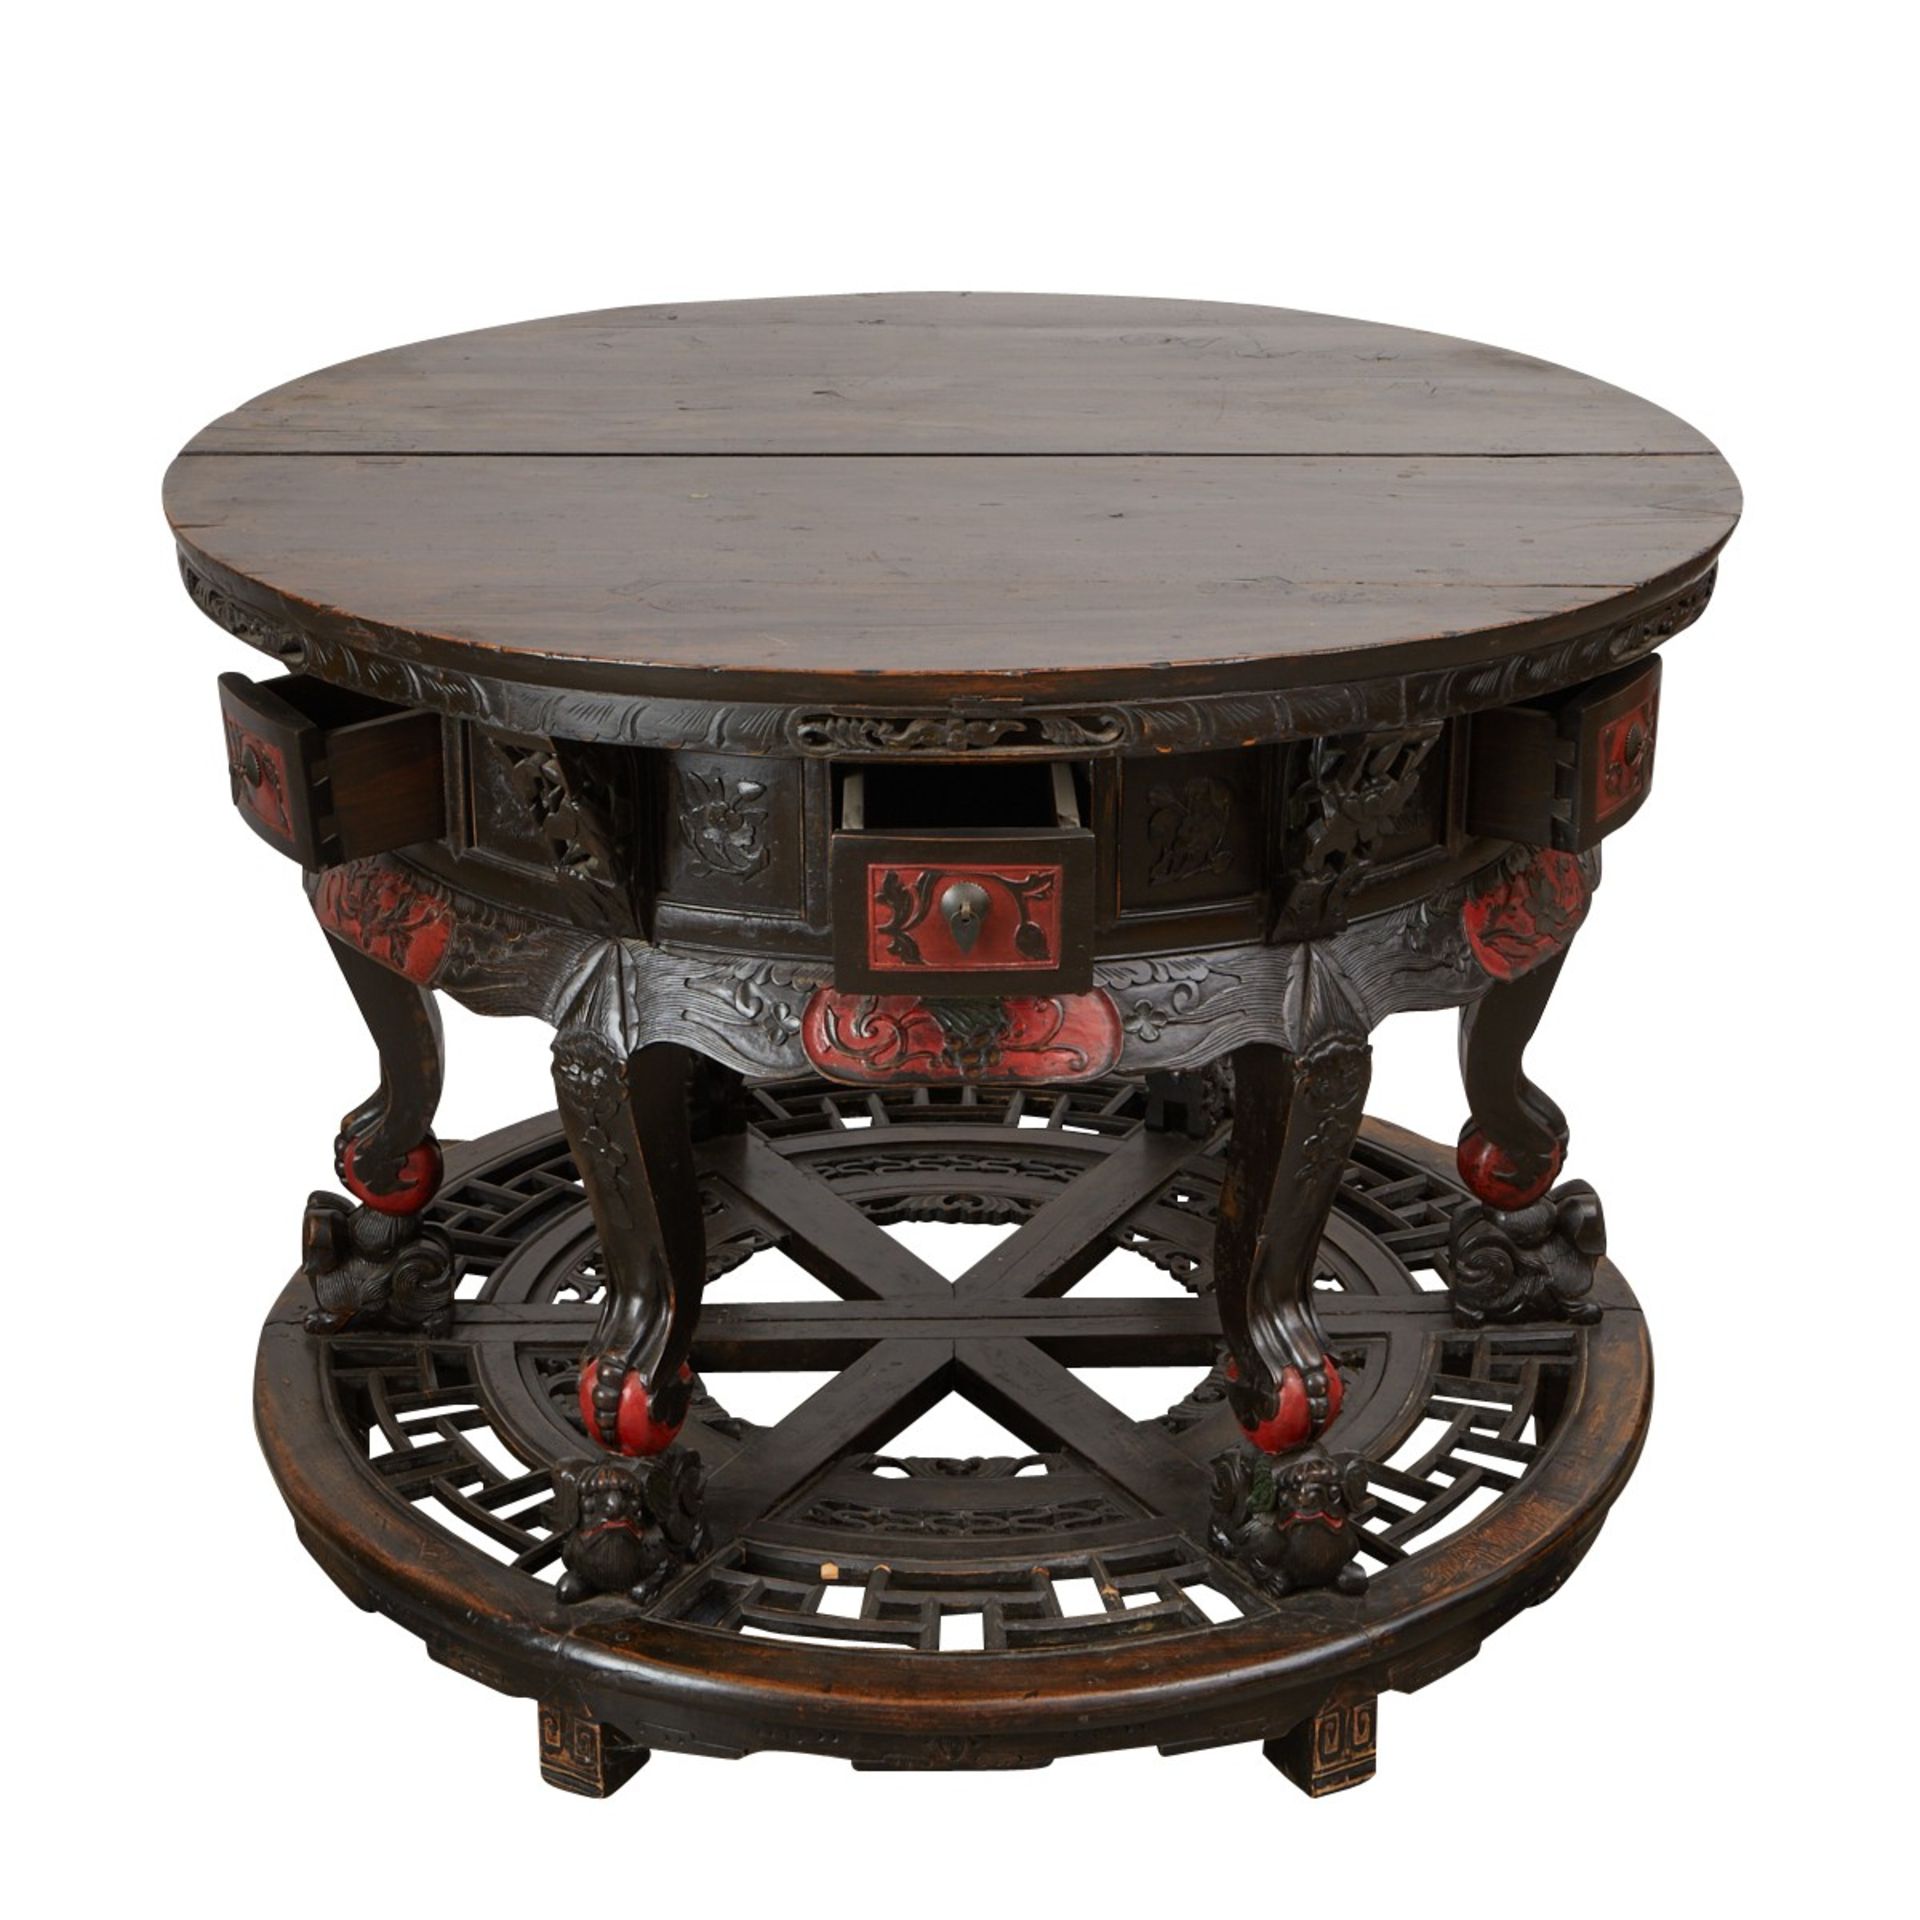 Chinese Round Carved Wood Table w/ Drawers 19th c. - Image 4 of 11